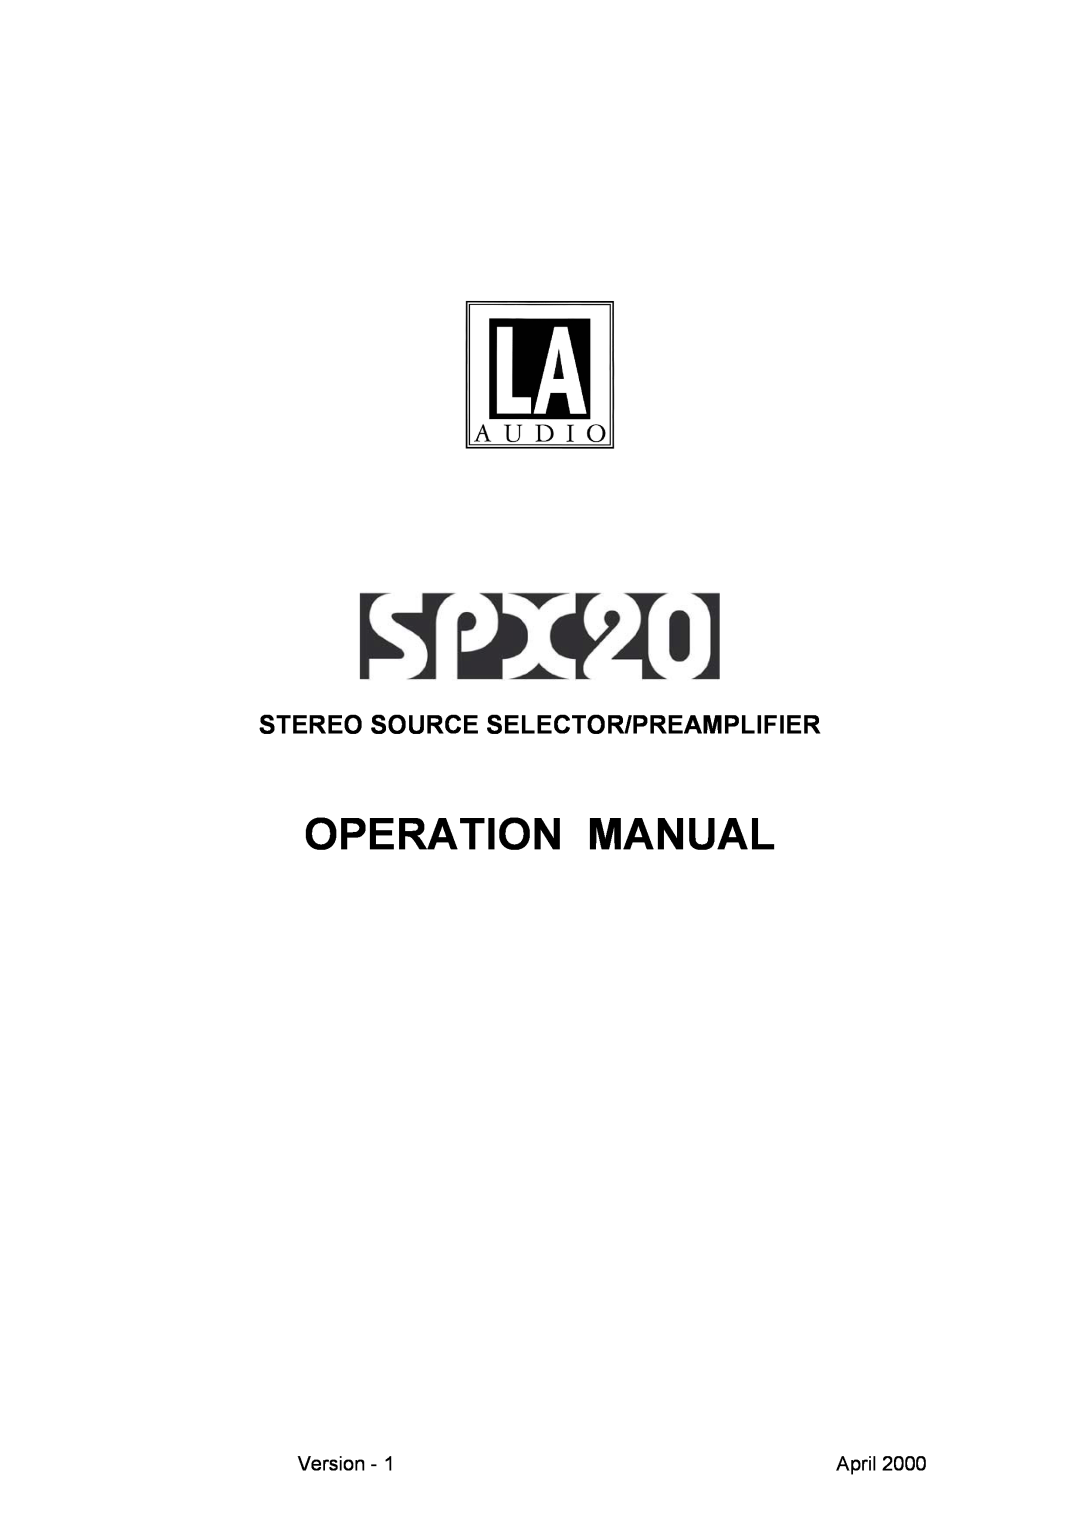 LA Audio Electronic SPX20 operation manual Stereo Source Selector/Preamplifier 